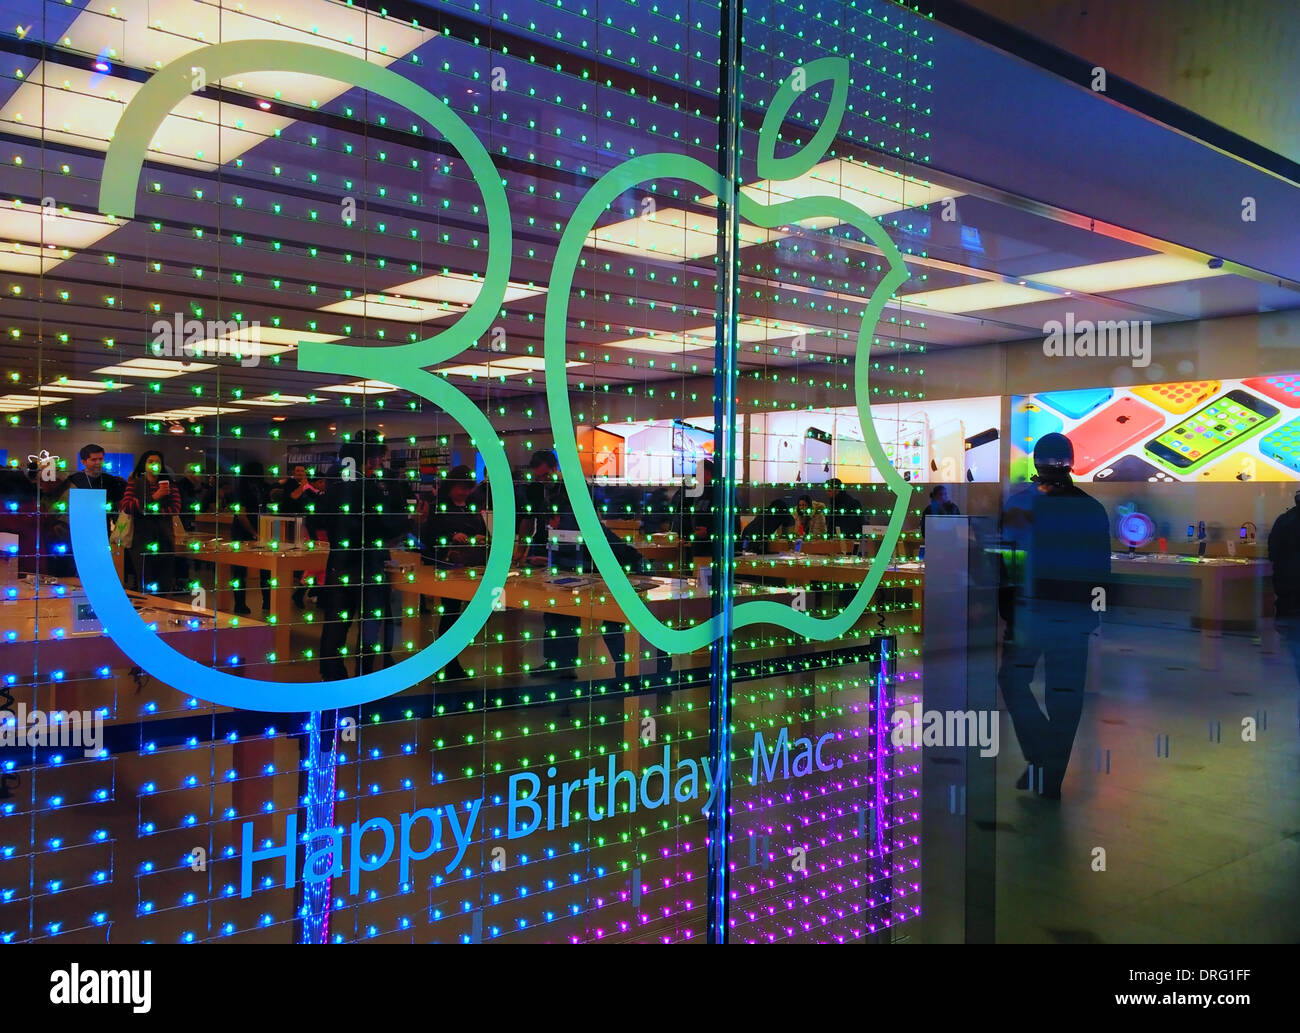 Garden City, New York, U.S. January 24, 2014. 30 years after Steve Jobs introduced the Macintosh computer to the public, this Apple store front window has colorful animated electric display with '30 Happy Birthday Mac' and the Apple logo is used for the 0 (zero) in the number 30 (thirty). Photo taken with an Apple iPhone 5S. Credit:  Ann E Parry/Alamy Live News Stock Photo